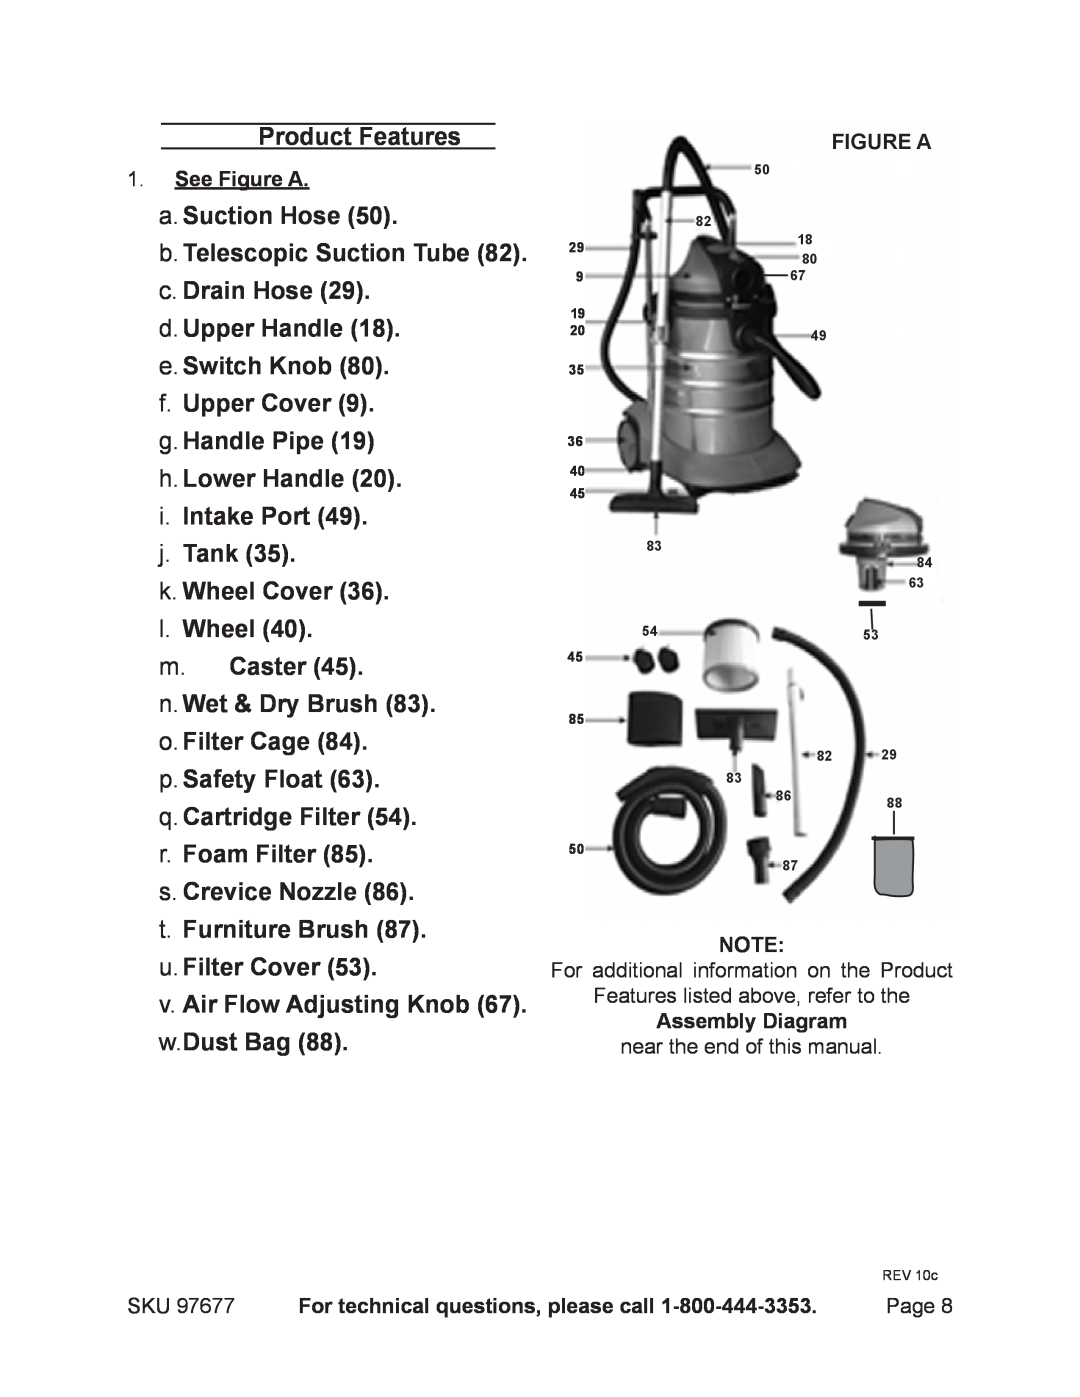 Chicago Electric 97677 manual Product Features 